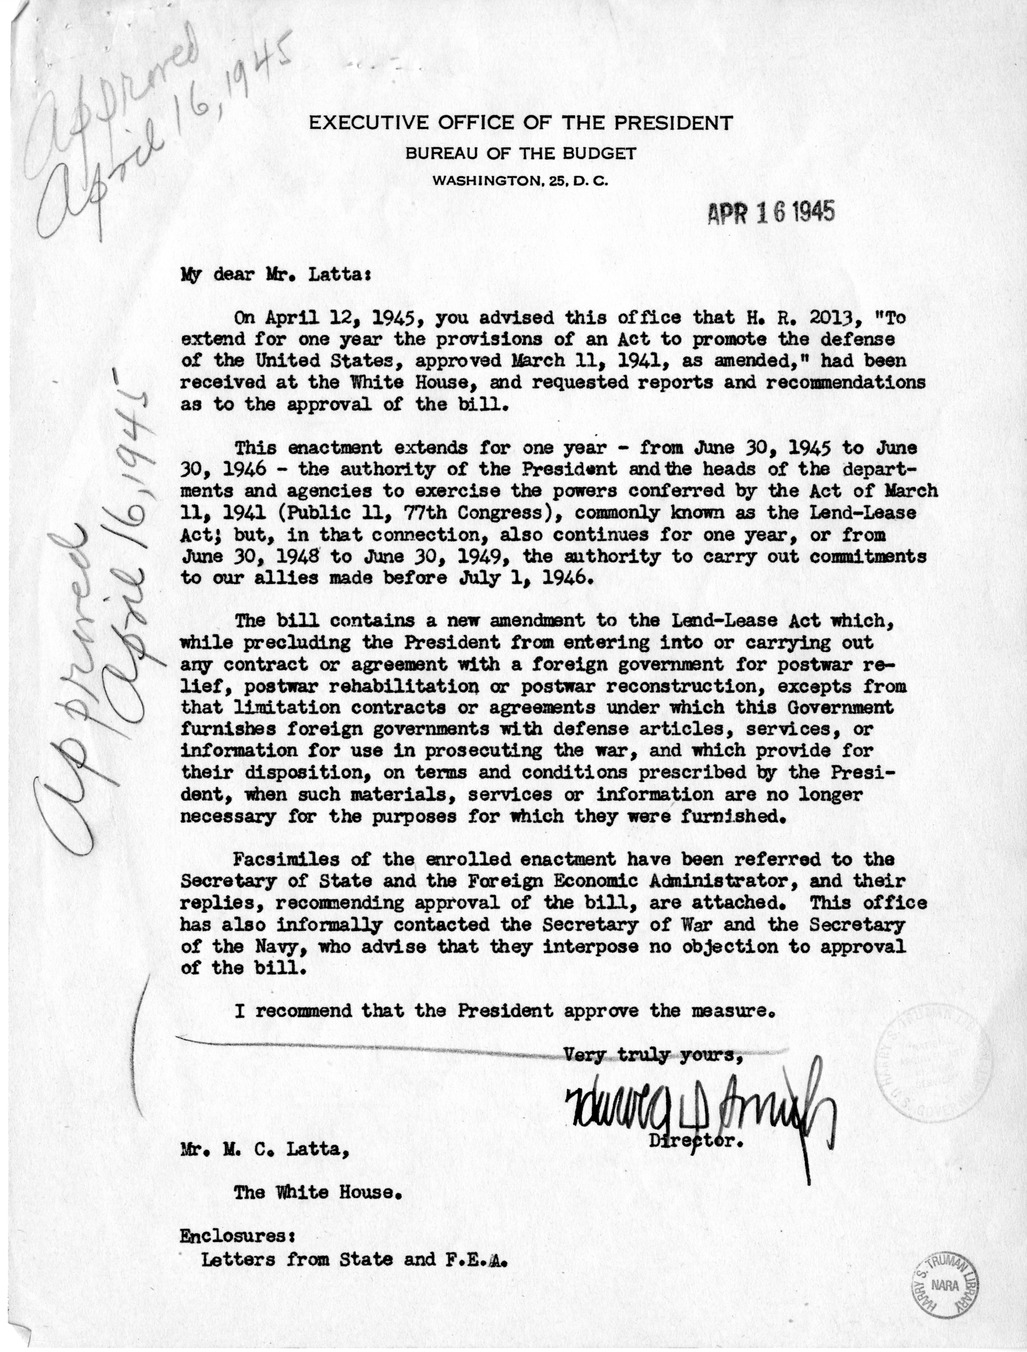 Memorandum from Harold D. Smith to M. C. Latta, H.R. 2013, To Extend for one Year the Provisions of an Act to Promote the Defense of the United States, Approved March 11,1941, as Amended, with Attachments